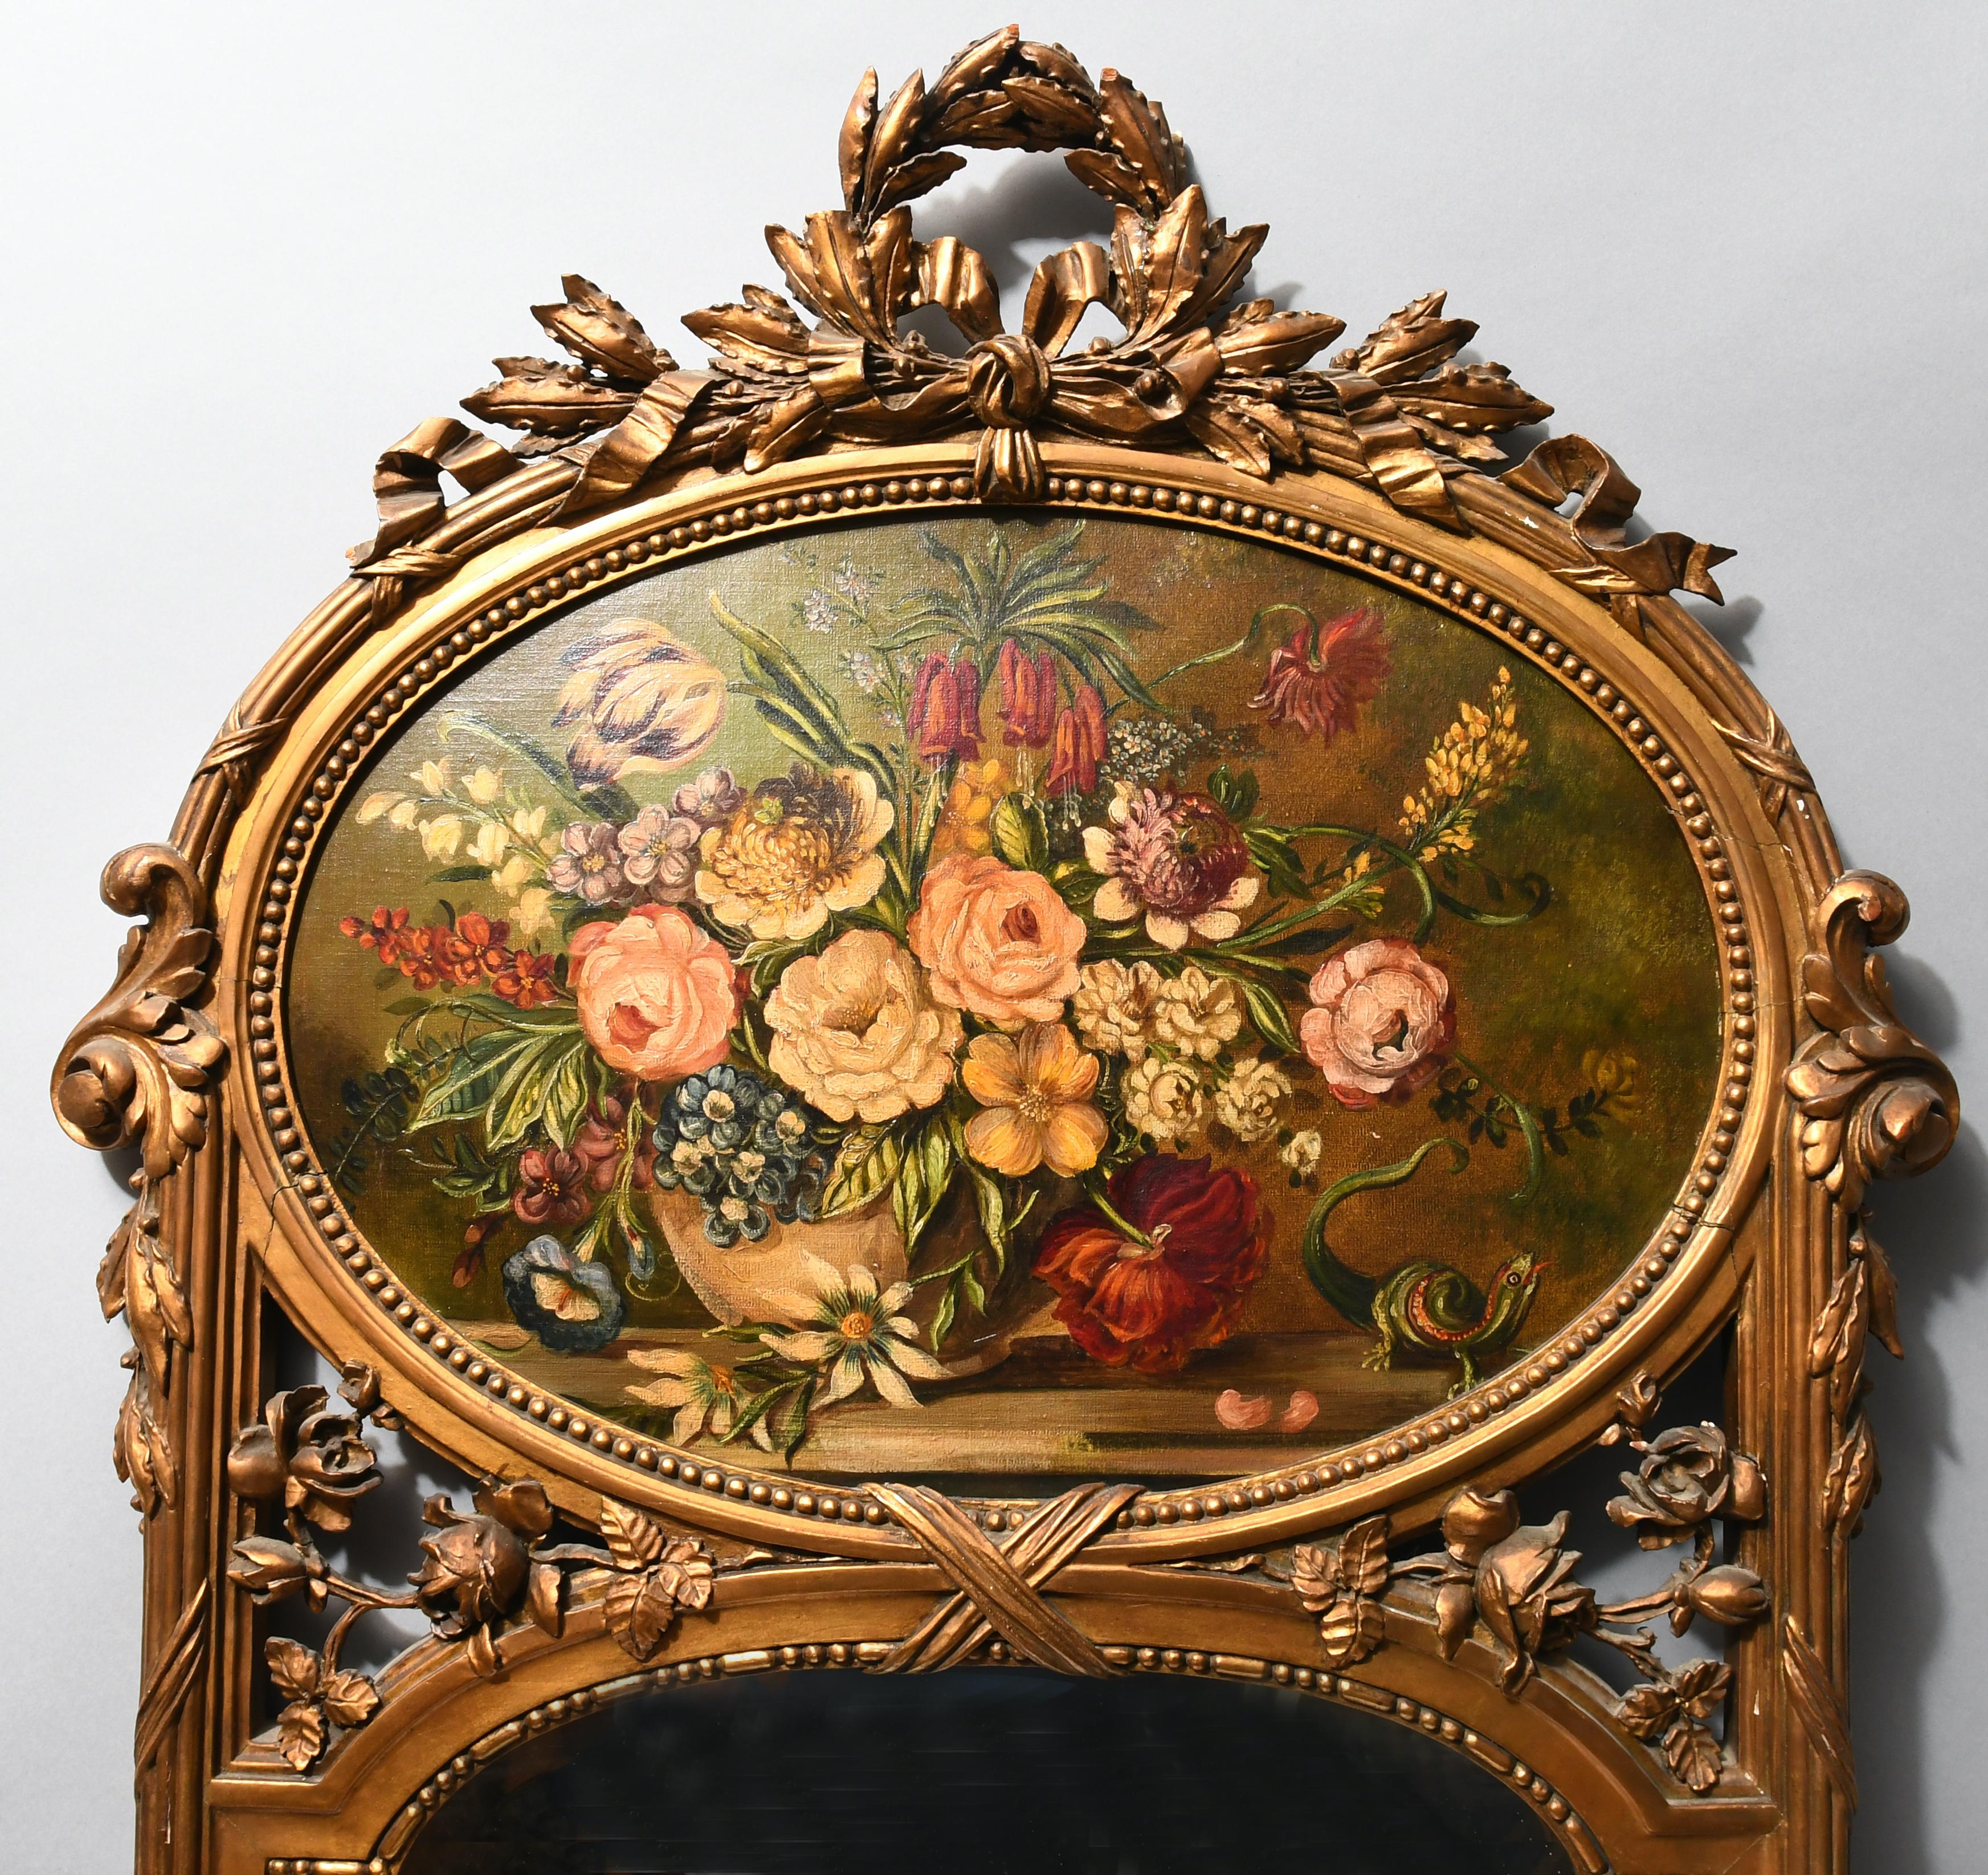 A gilded wood wall arc shaped mirror embellished with a bay leaves garland that forms a wreath as a finial. The frame around the mirror and painting is reeded and there are some acanthus leaves affixed around it. Between painting and the mirror